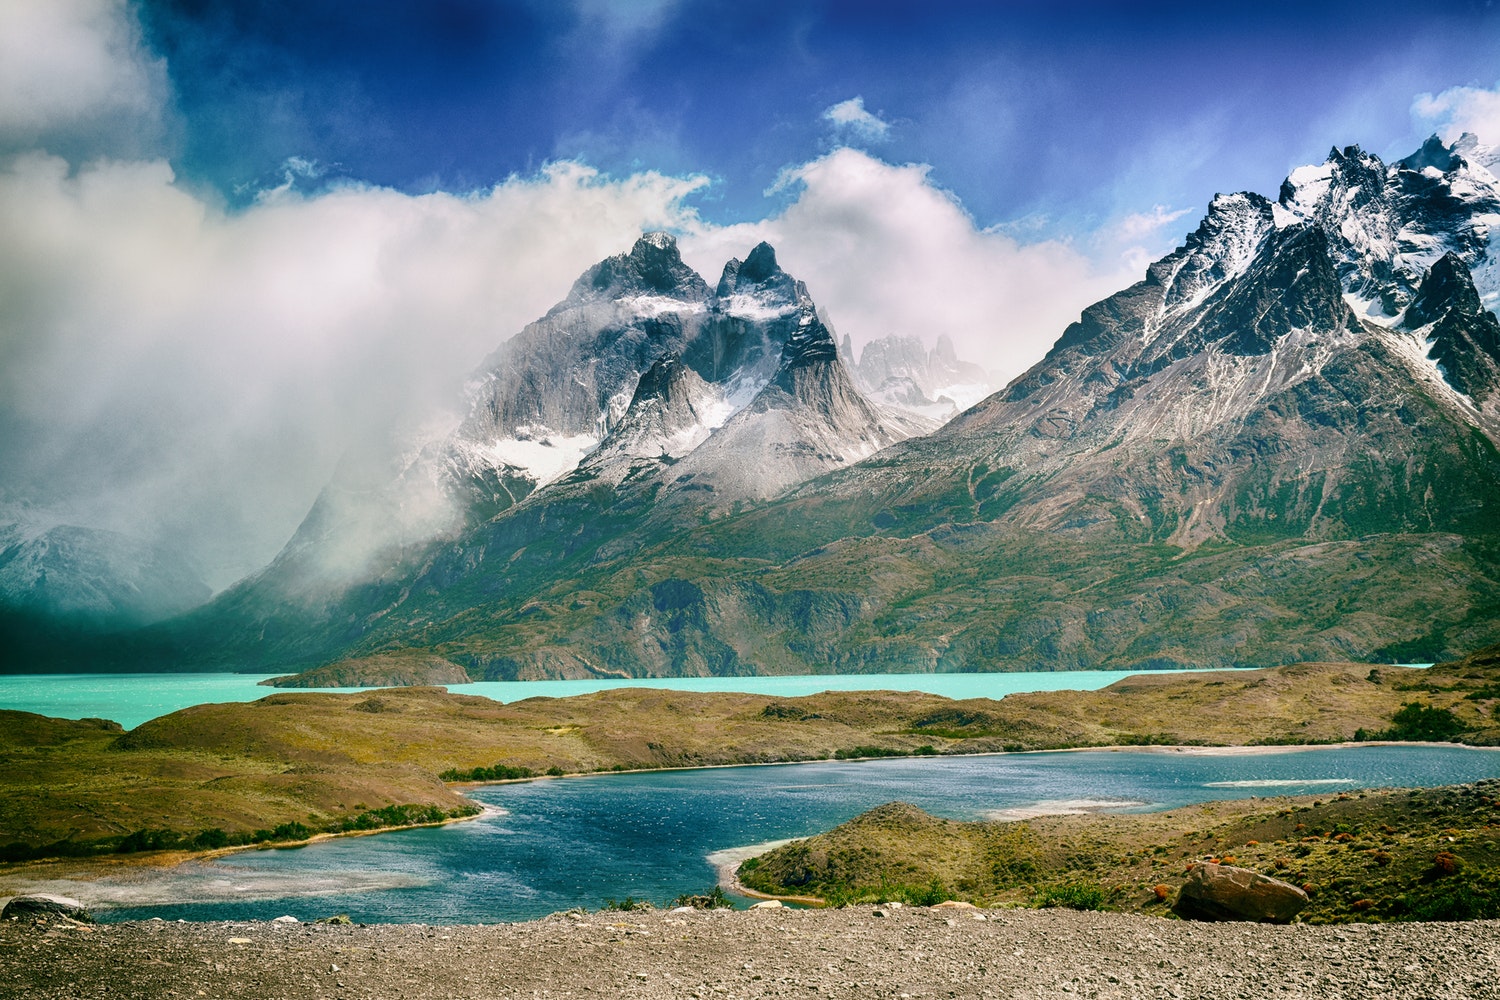 torres del paine - one of the best things to do in Chile